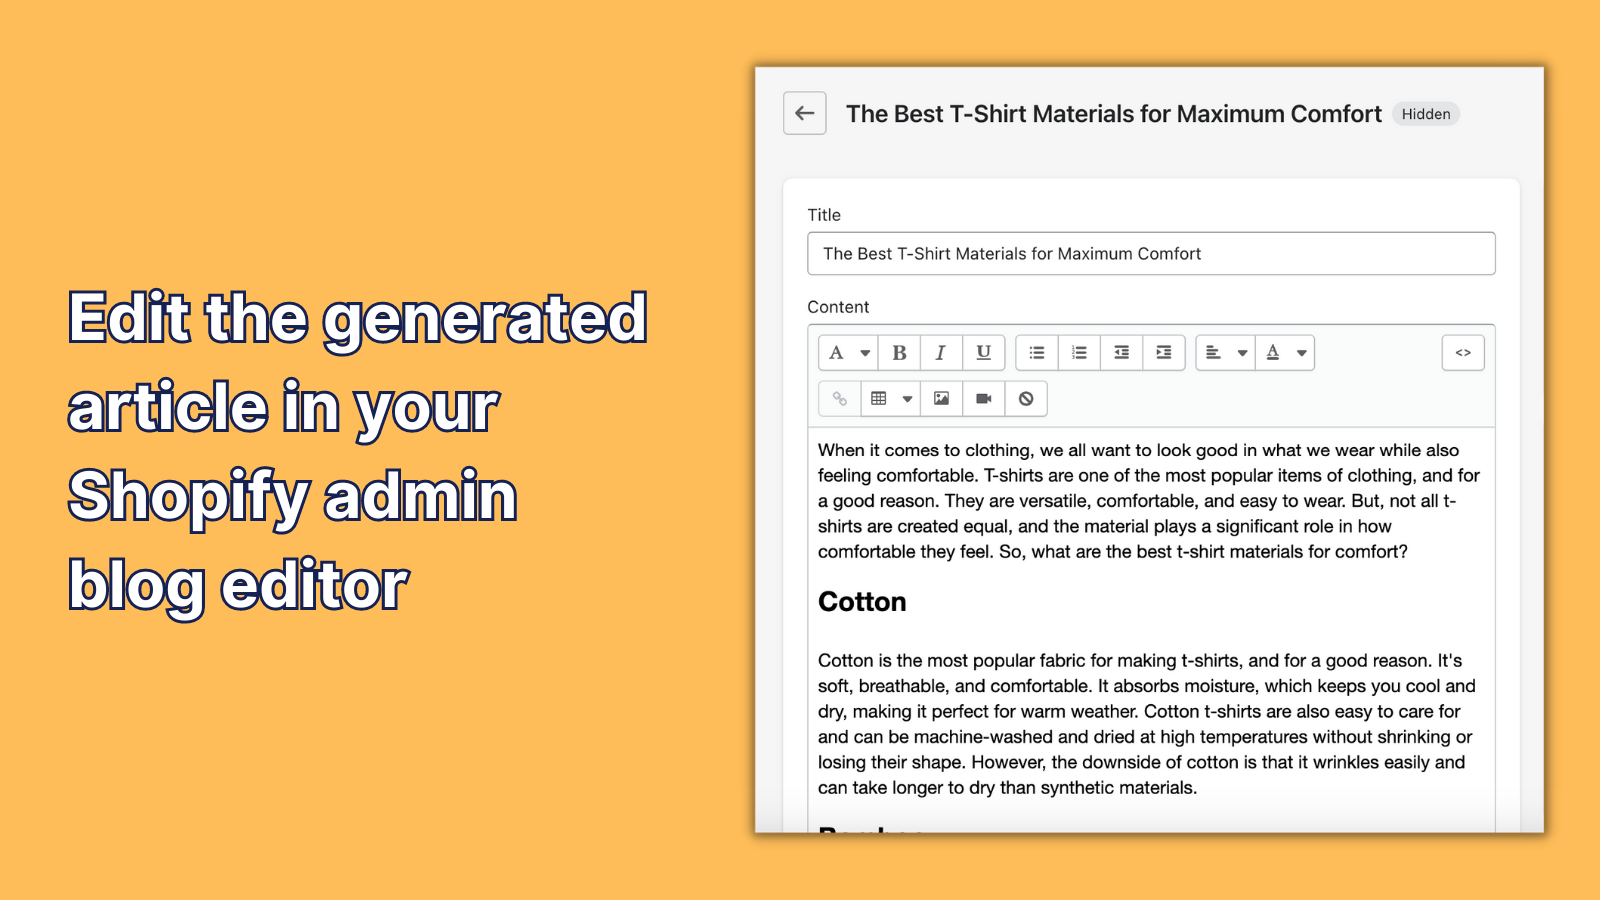 Edit the generated article in your Shopify admin blog editor